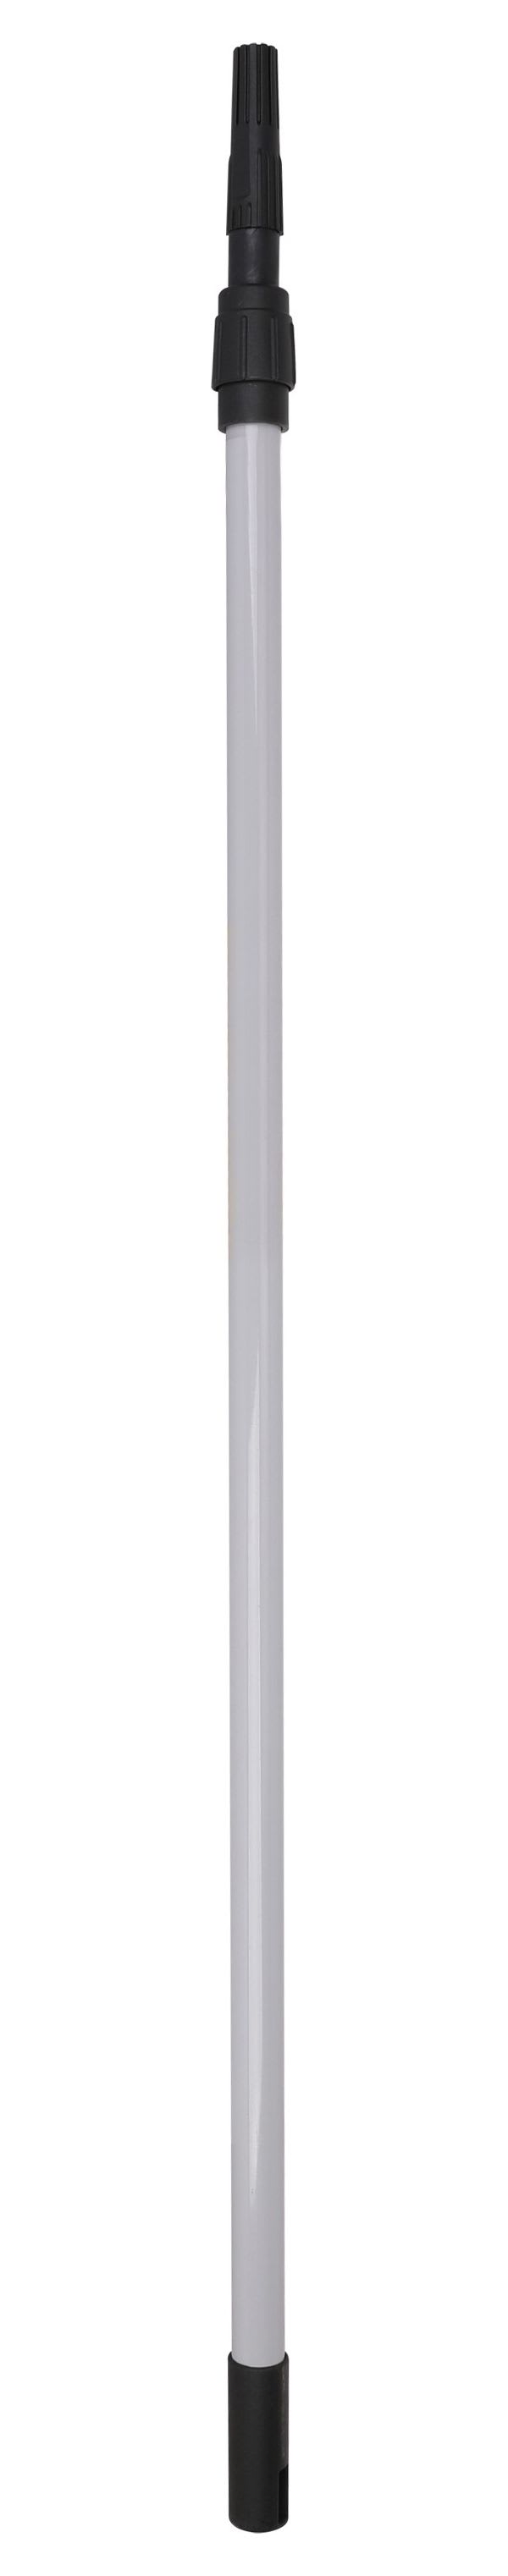 Telescopic Roller Extension Pole - 1 to 2m | Wickes.co.uk